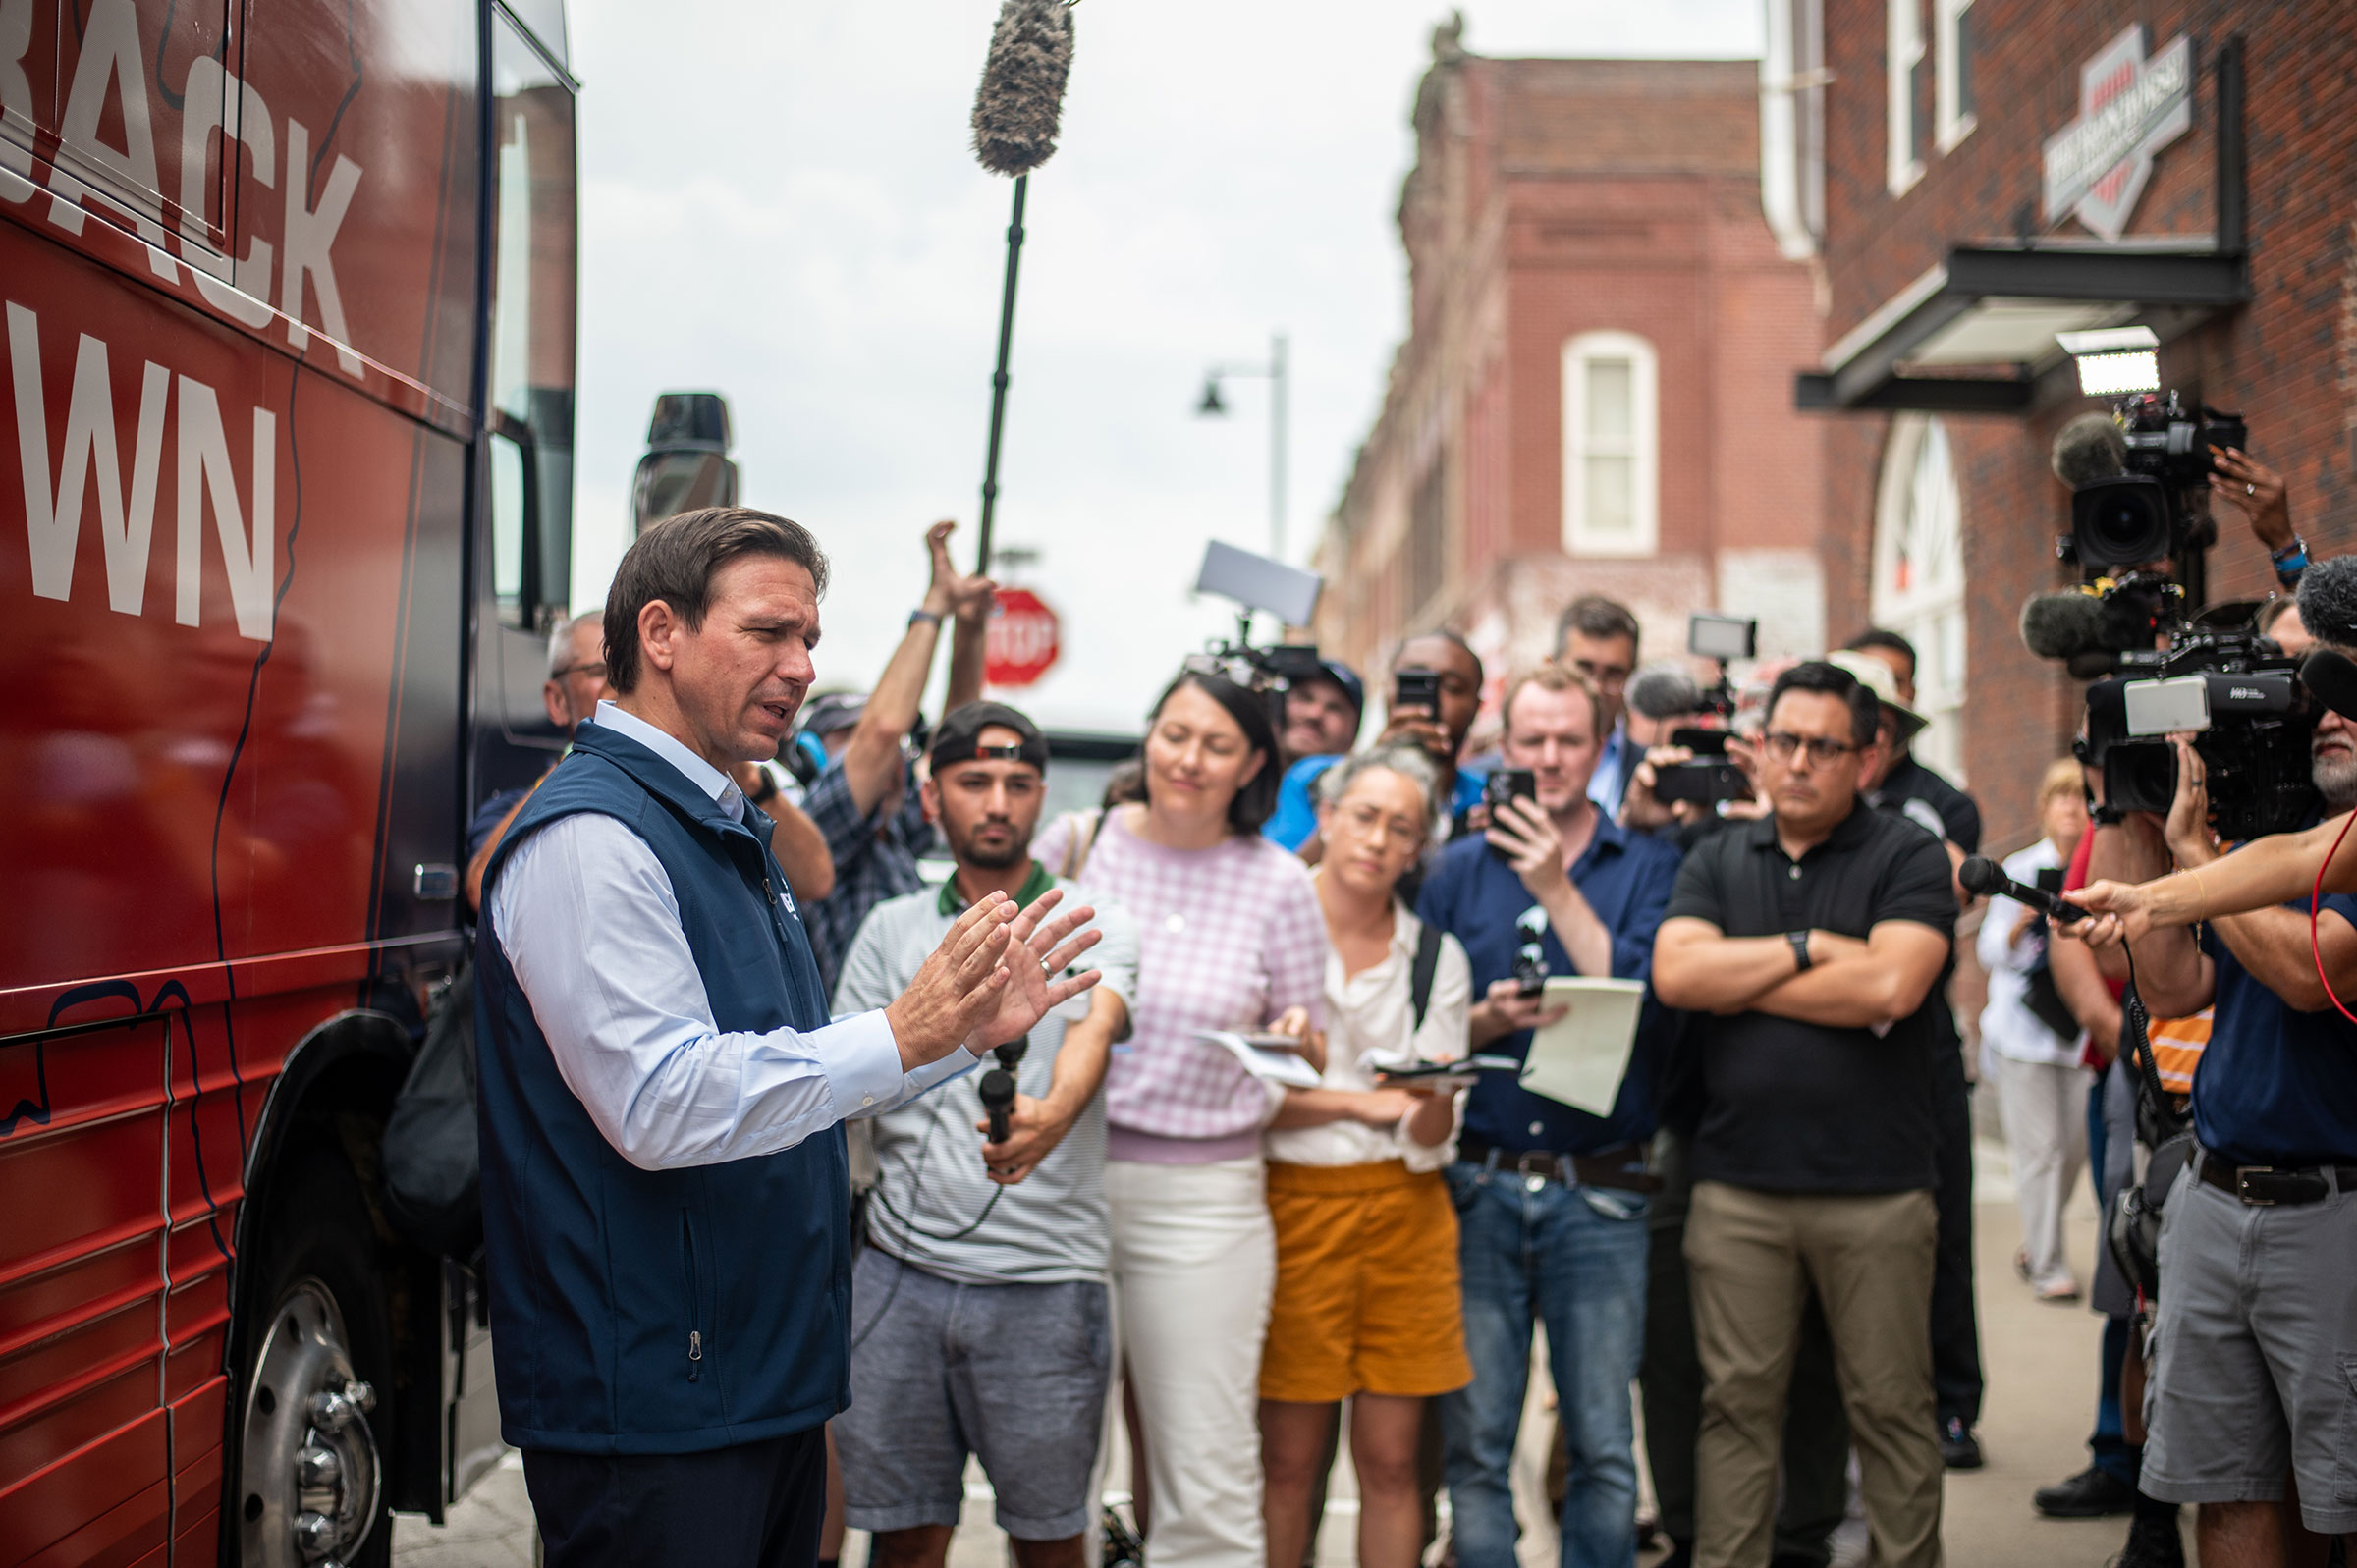 DeSantis meets the media during a July 27 campaign stop in Chariton, Iowa (Sergio Flores—The Washington Post/Getty Images)